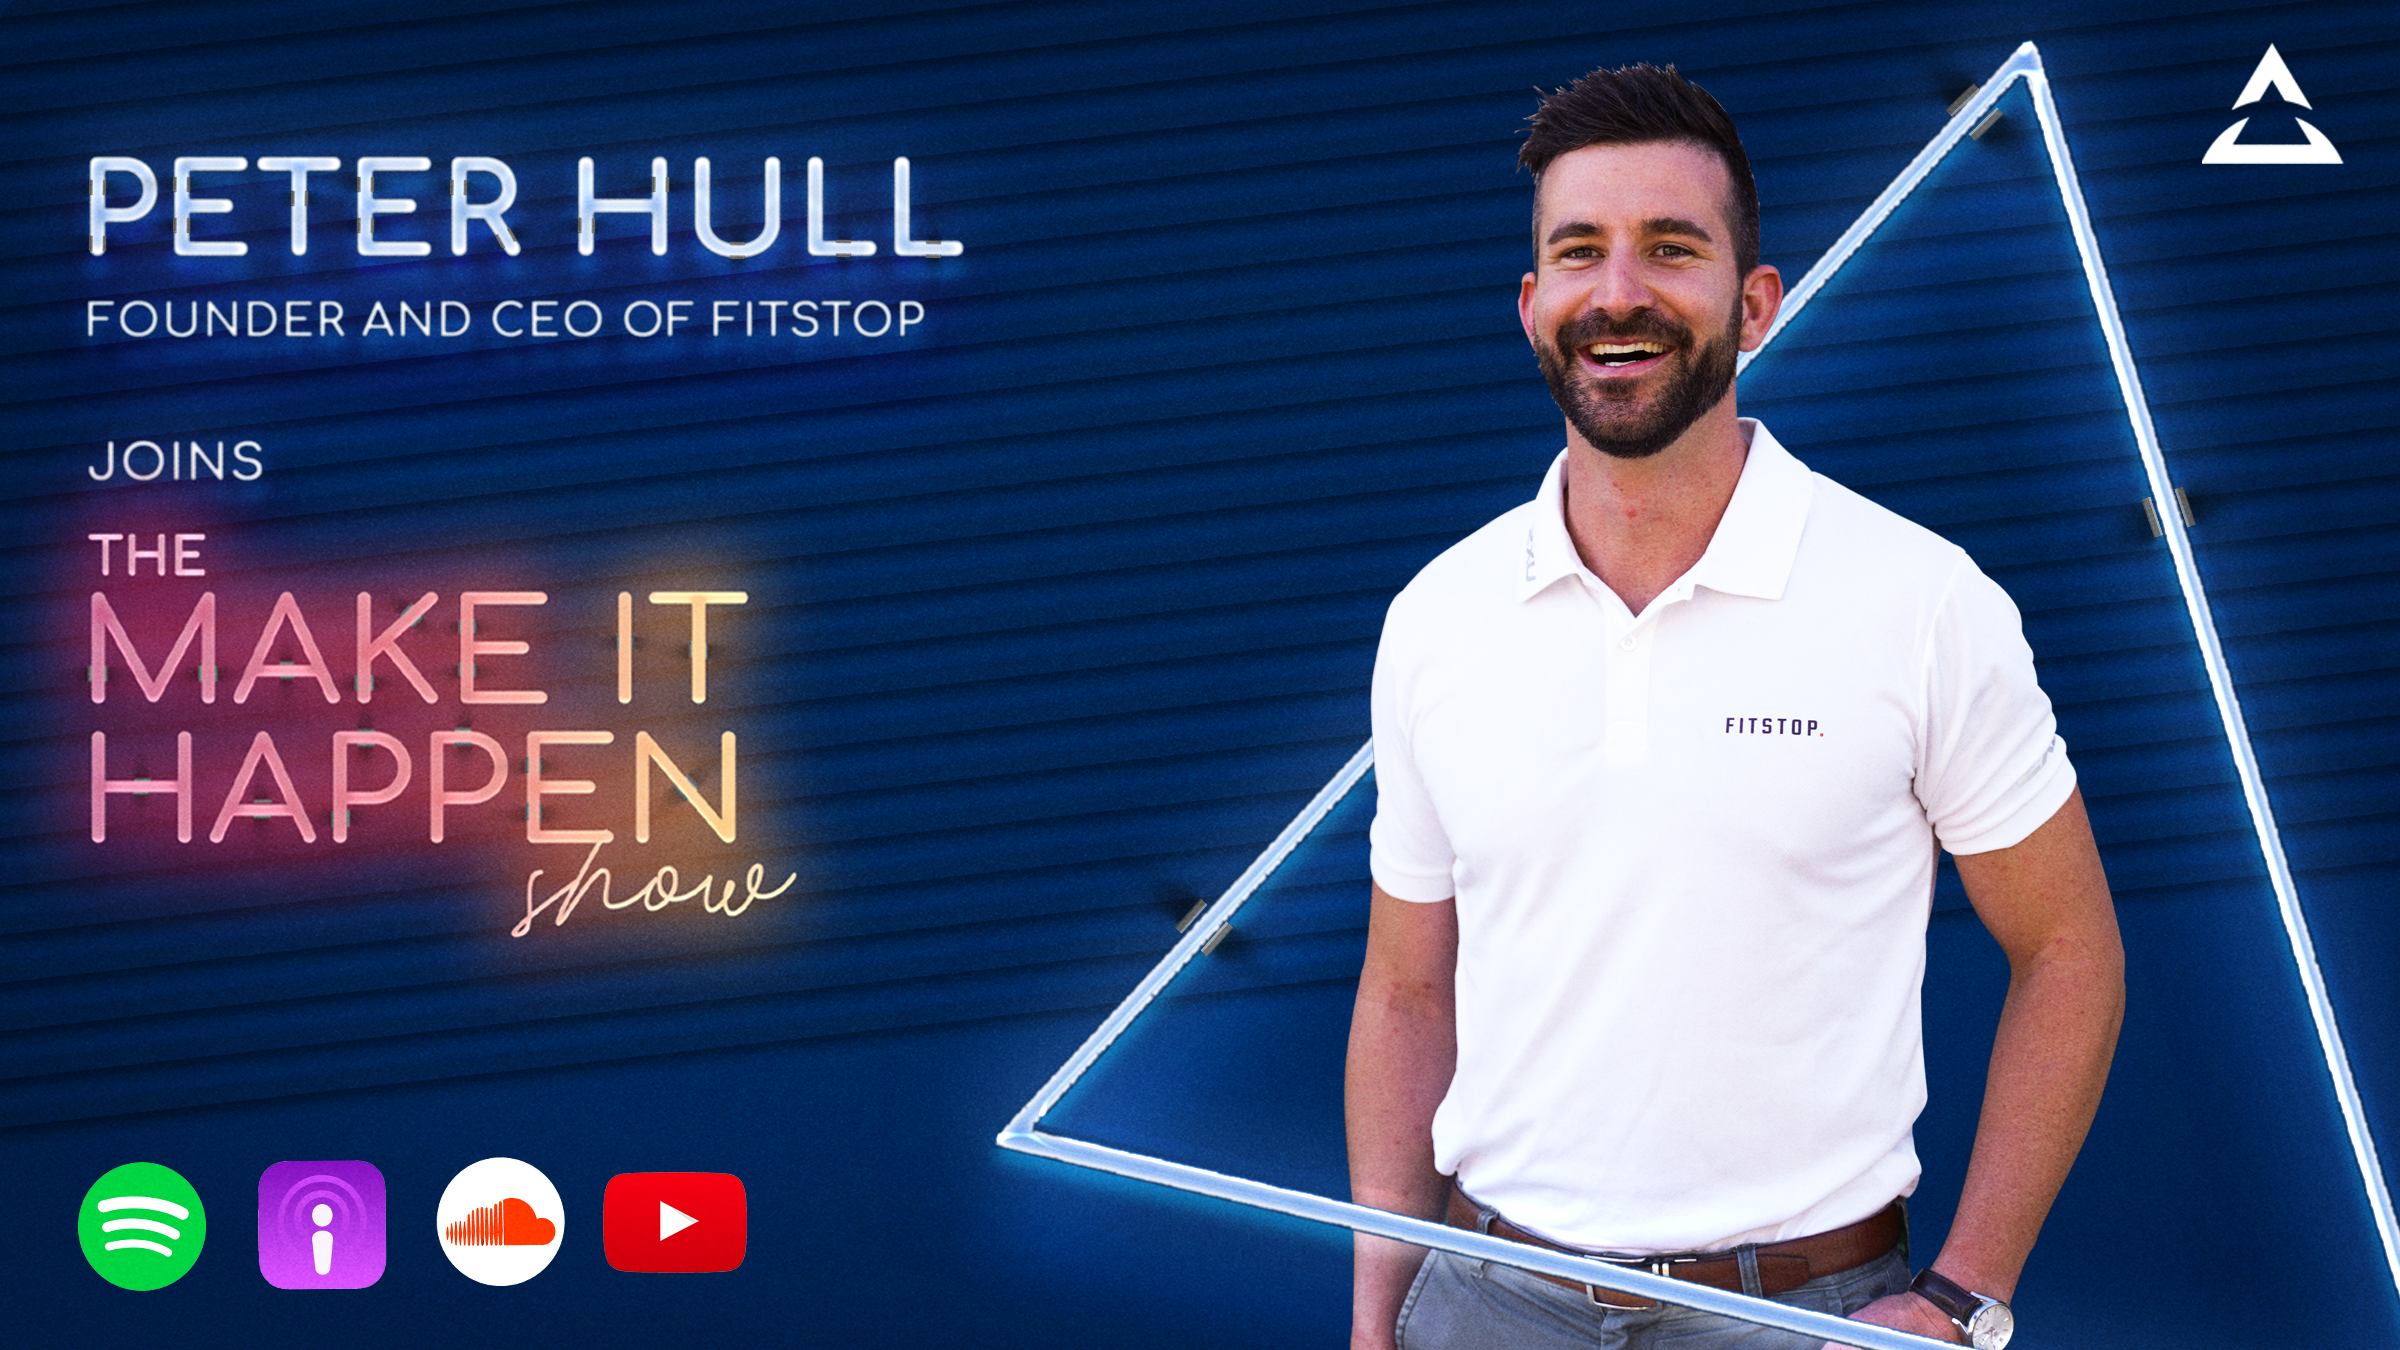 Peter Hull, Co-Founder and CEO of Fitstop joins The Make It Happen Show